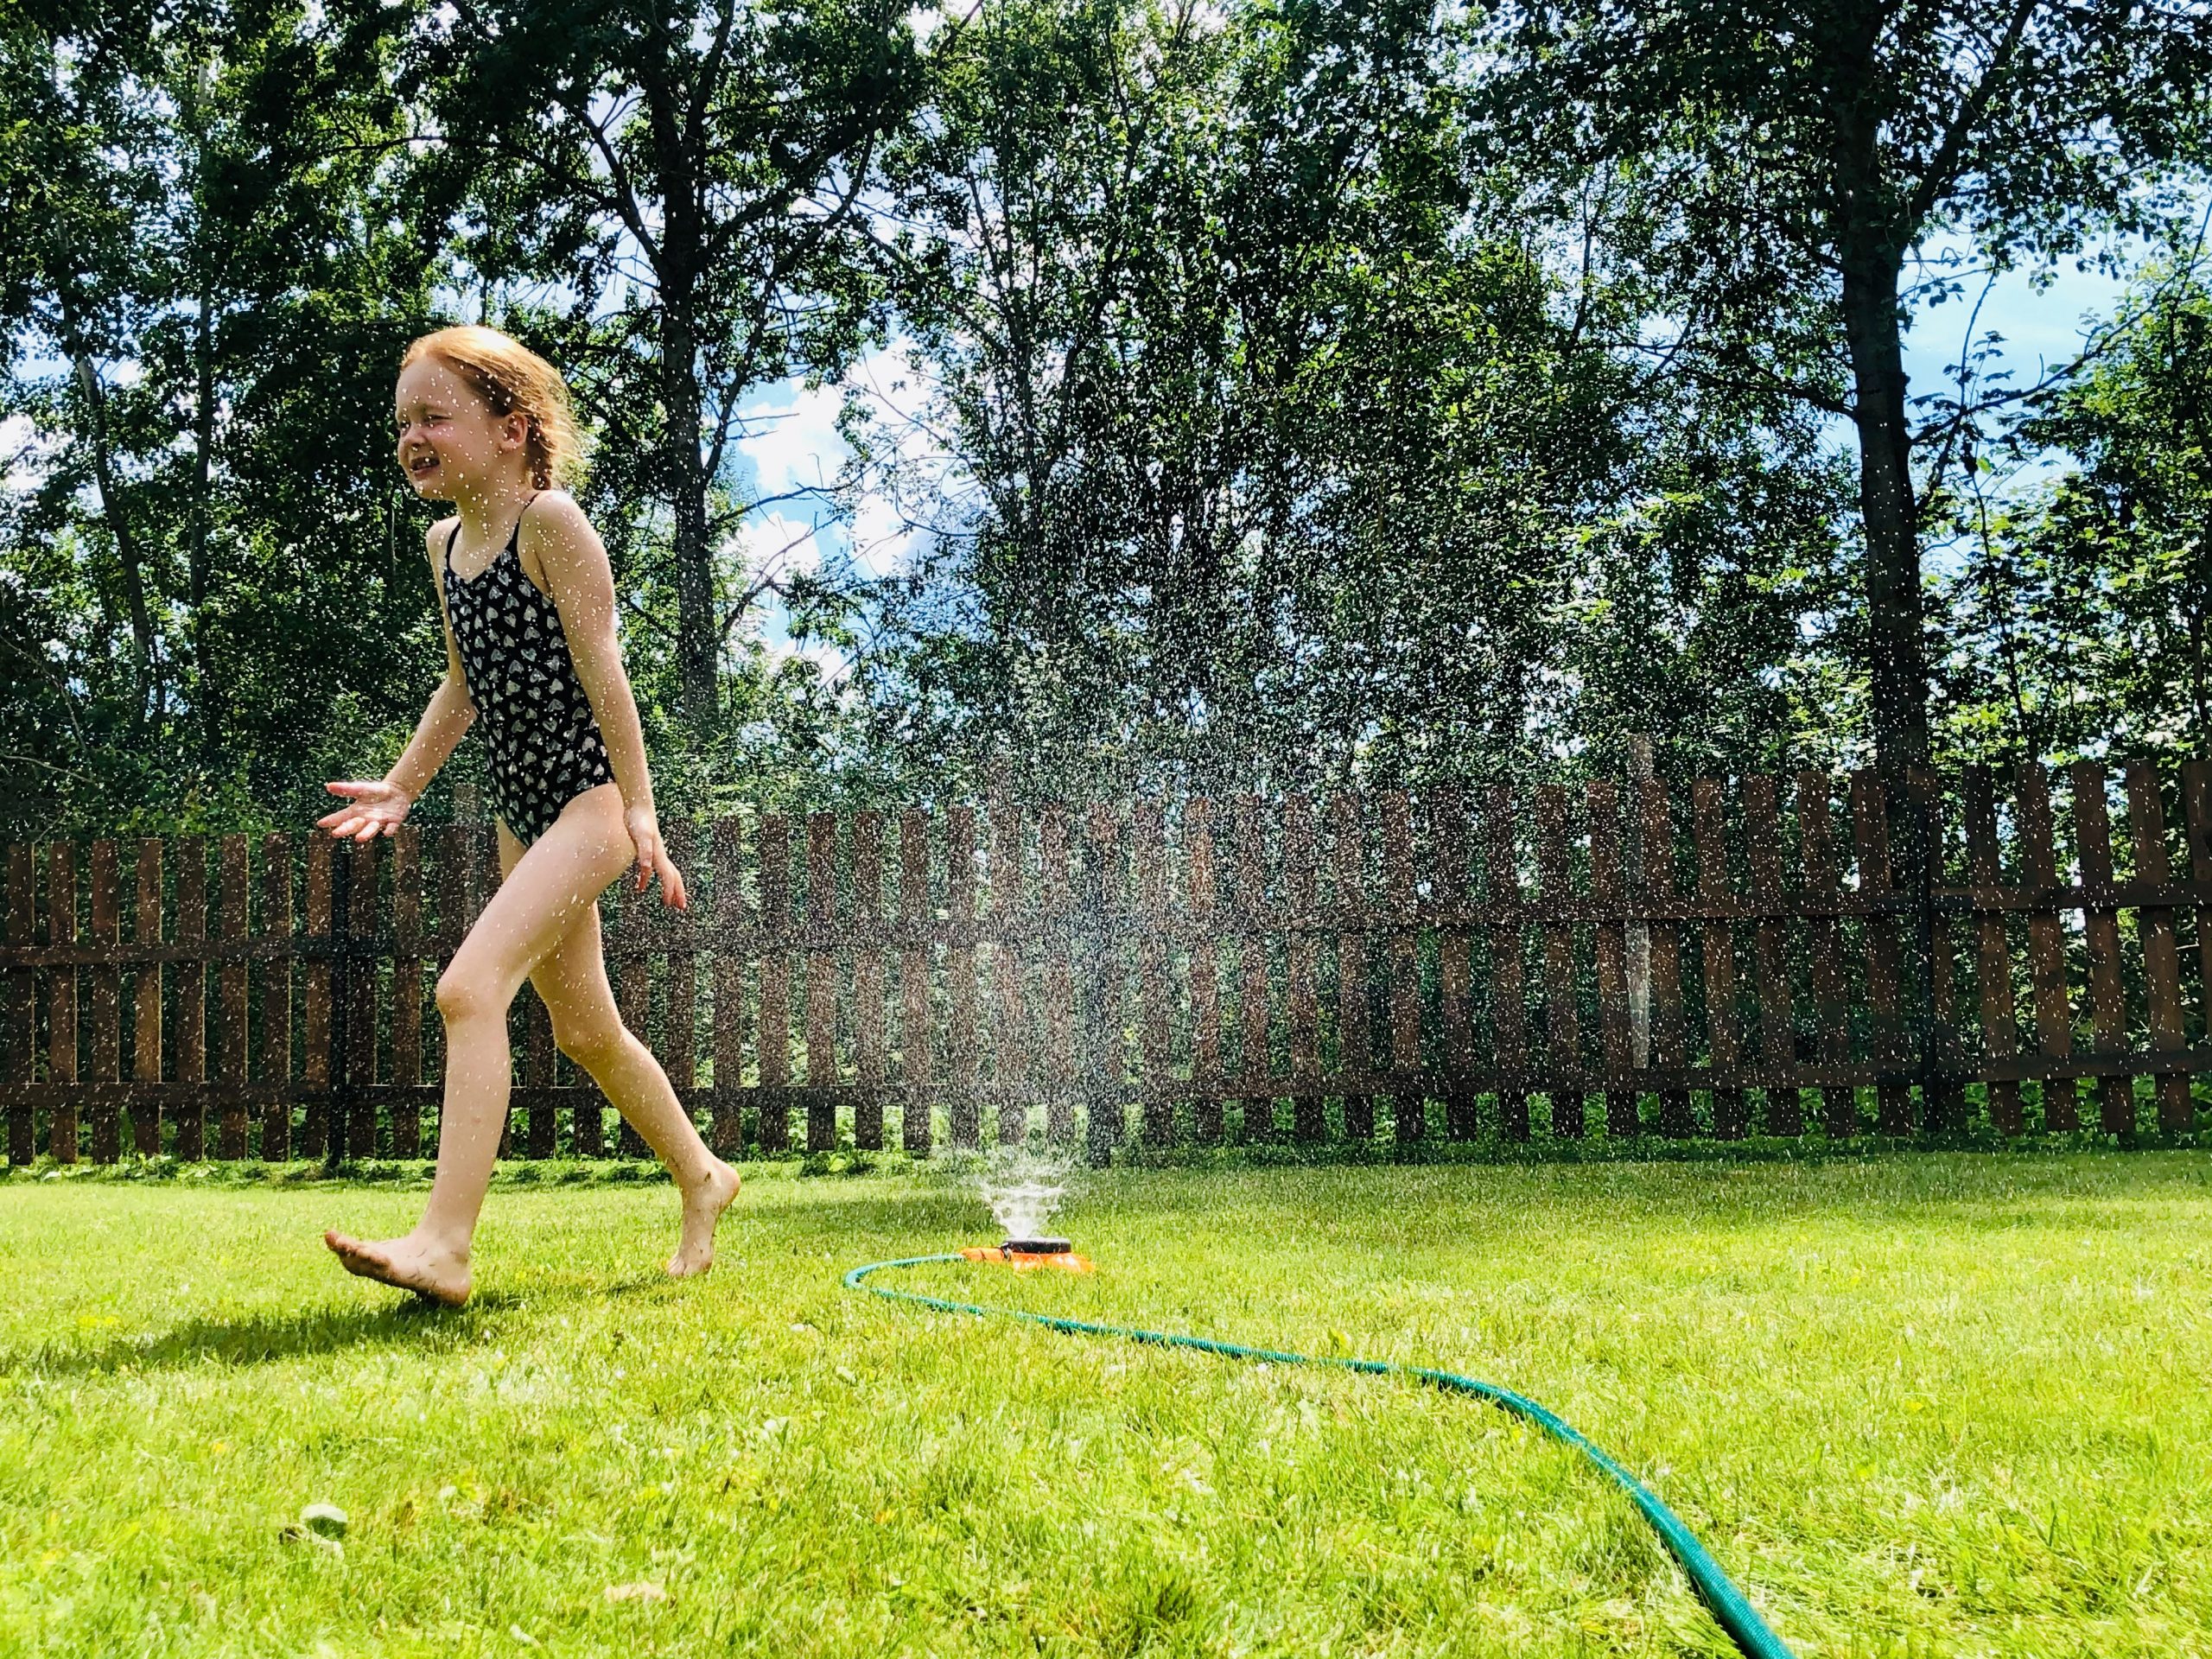 Development Land for Sale - child in garden with hose on